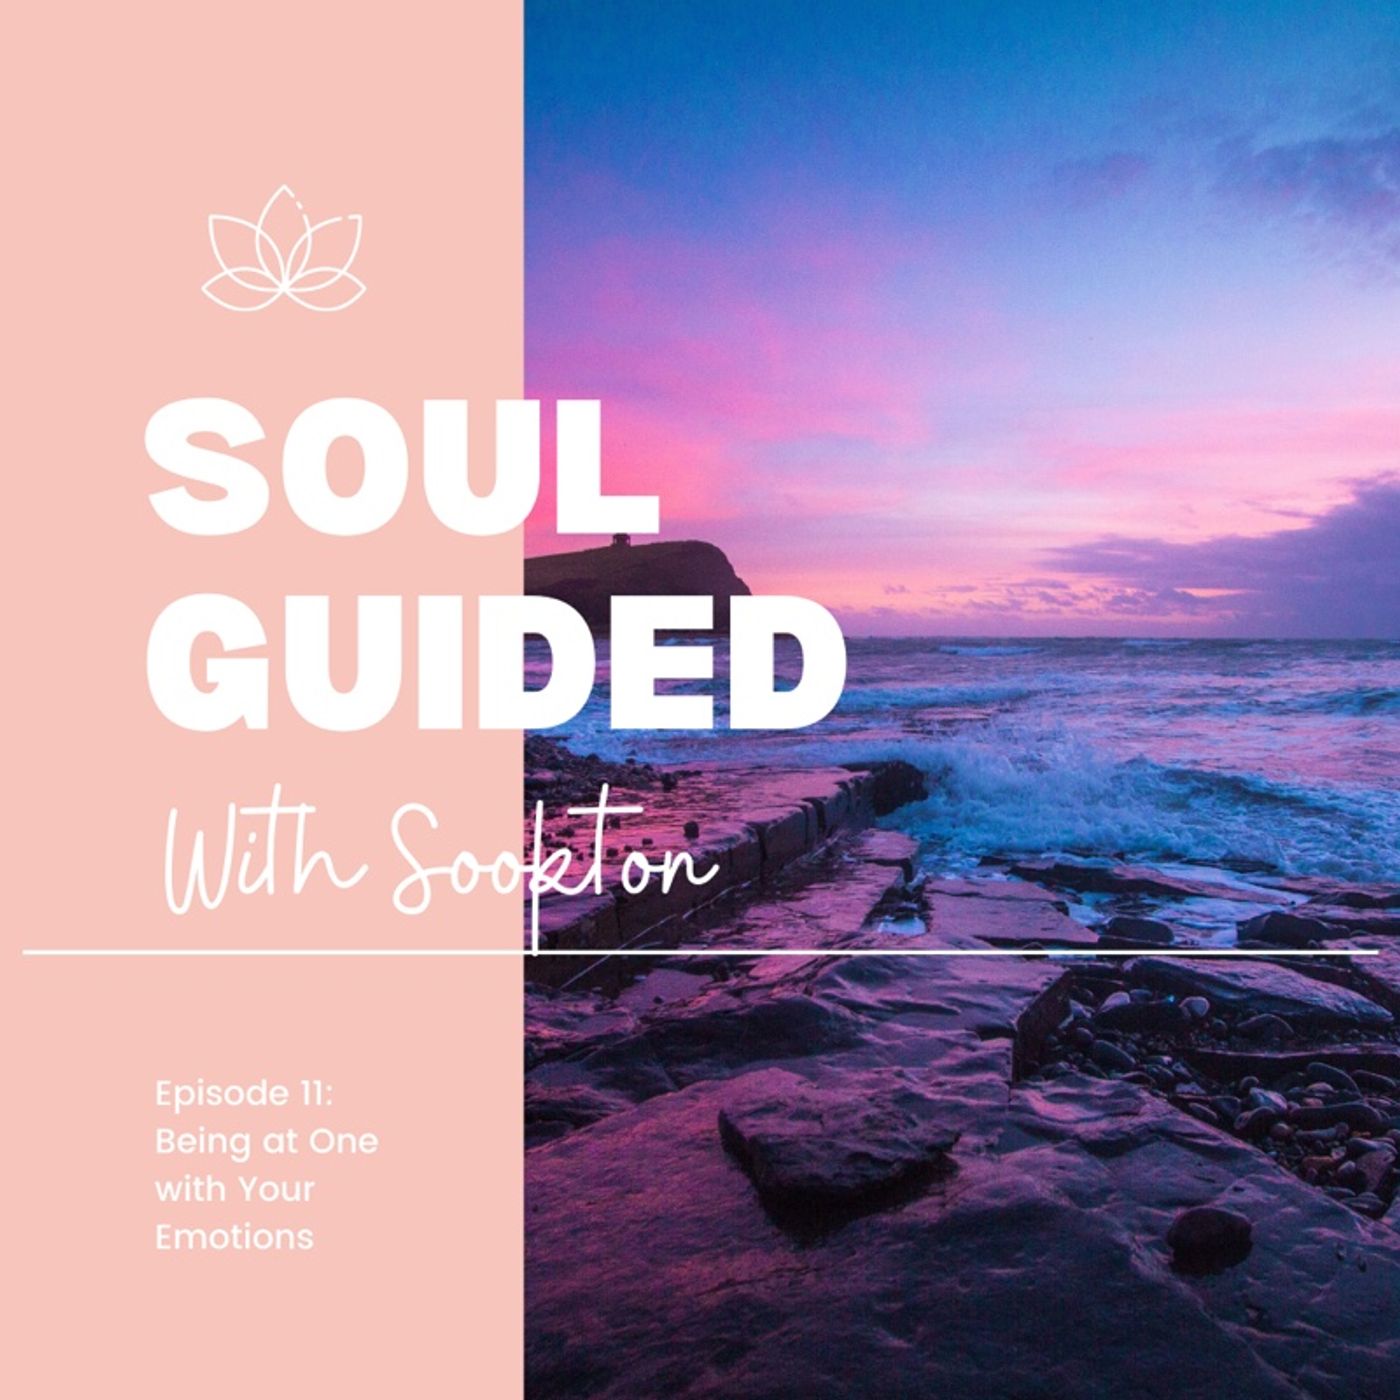 Soul Guided With Sookton: Being at One with Your Emotions